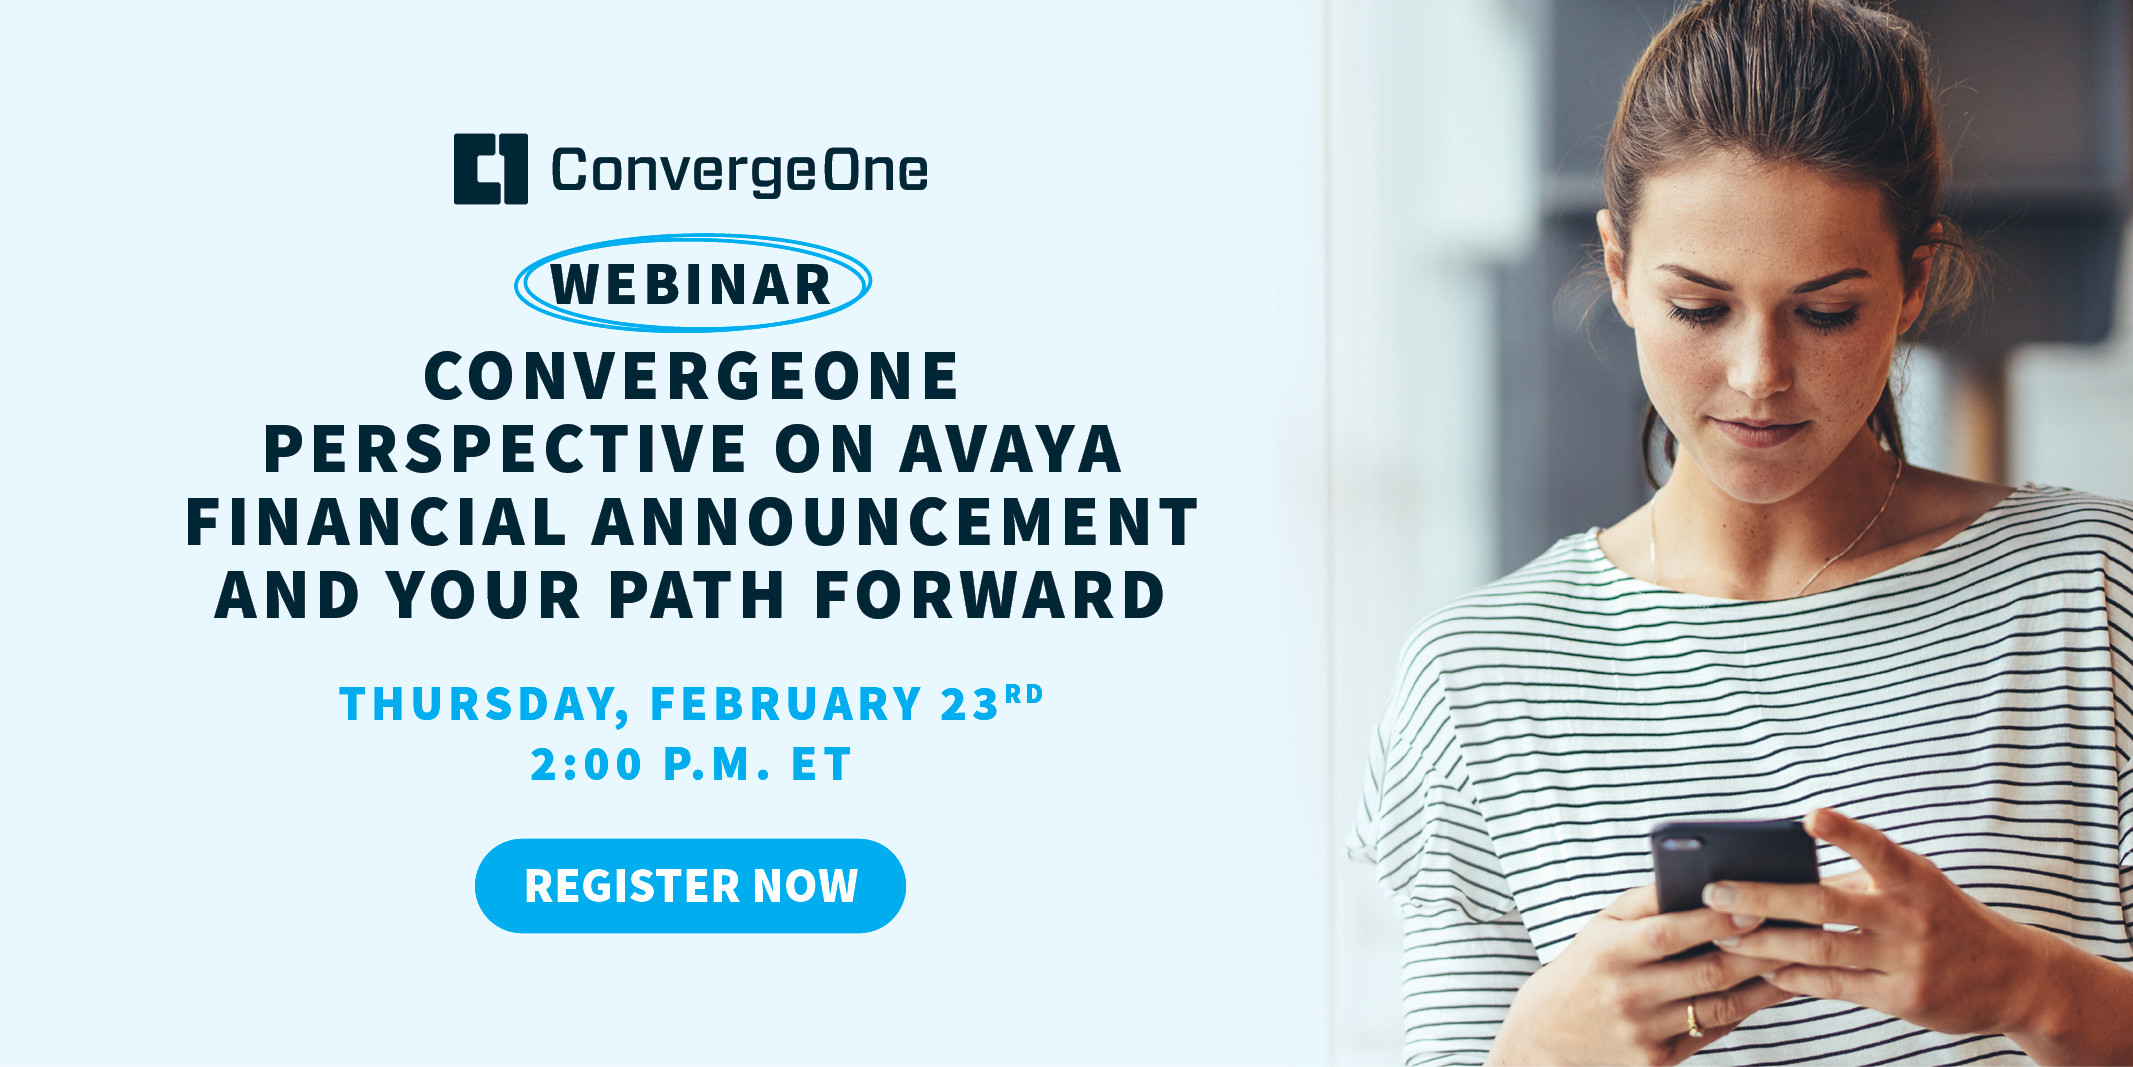 Webinar: ConvergeOne Perspective on Avaya Financial Announcement and Your Path Forward